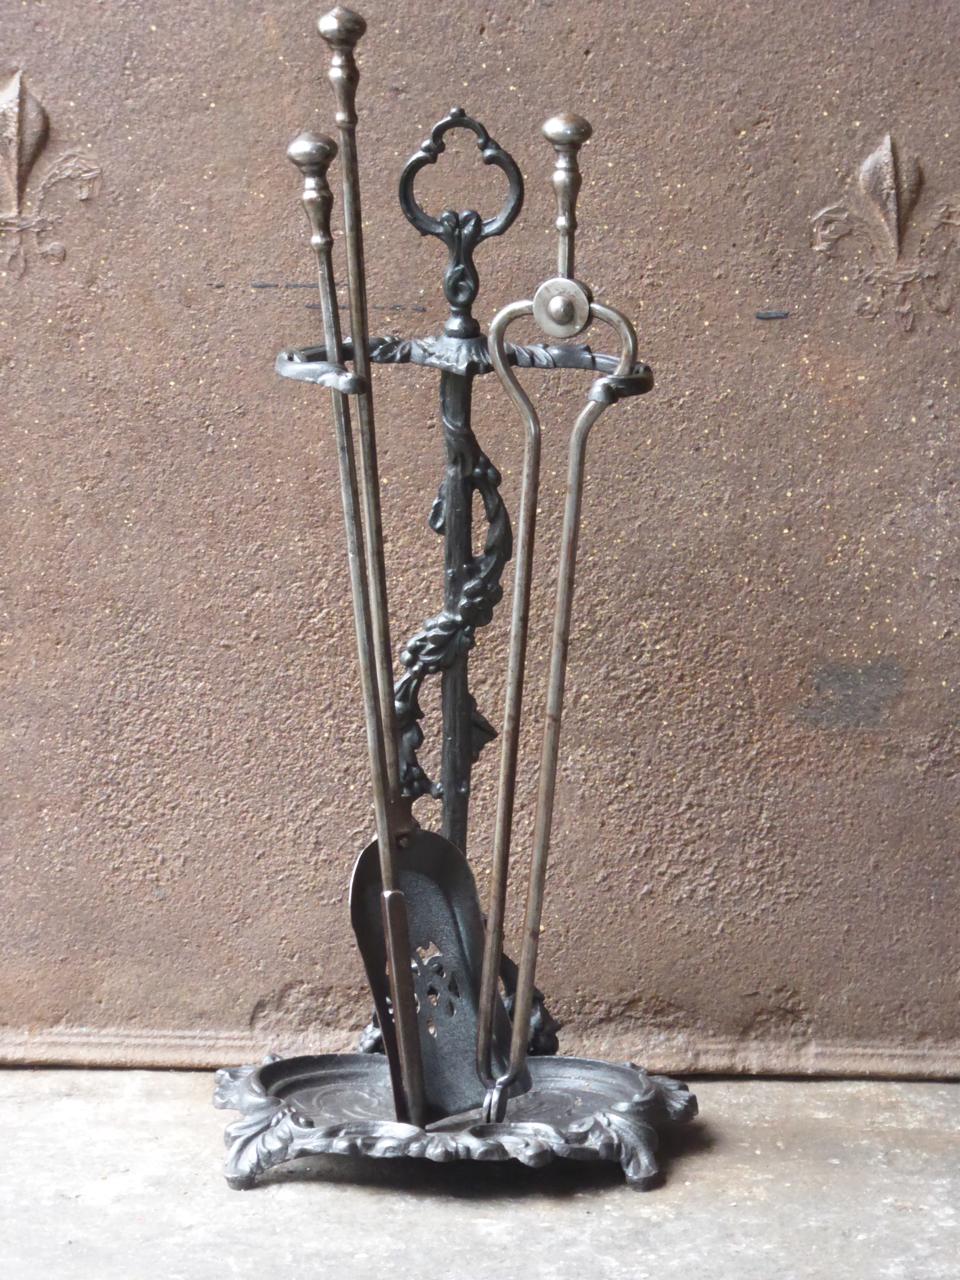 19th century English Victorian fireplace toolset made of cast iron and wrought iron. The toolset consists of three tools and a stand.

We have a unique and specialized collection of antique and used fireplace accessories consisting of more than 1000